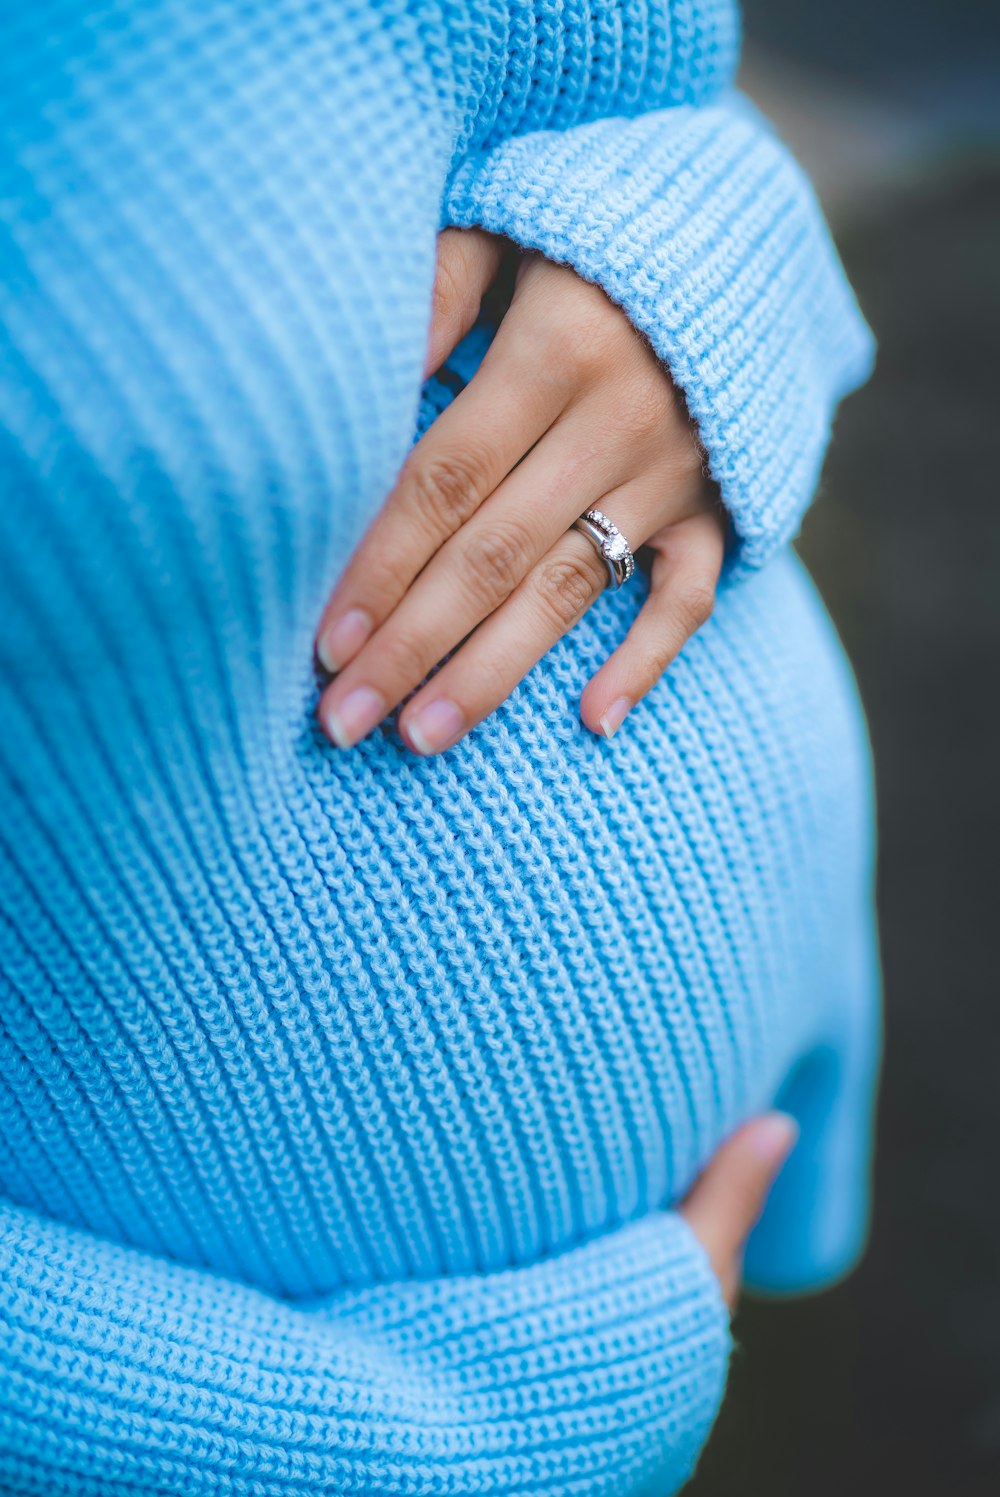 woman holding her belly while wearing blue knit sweater